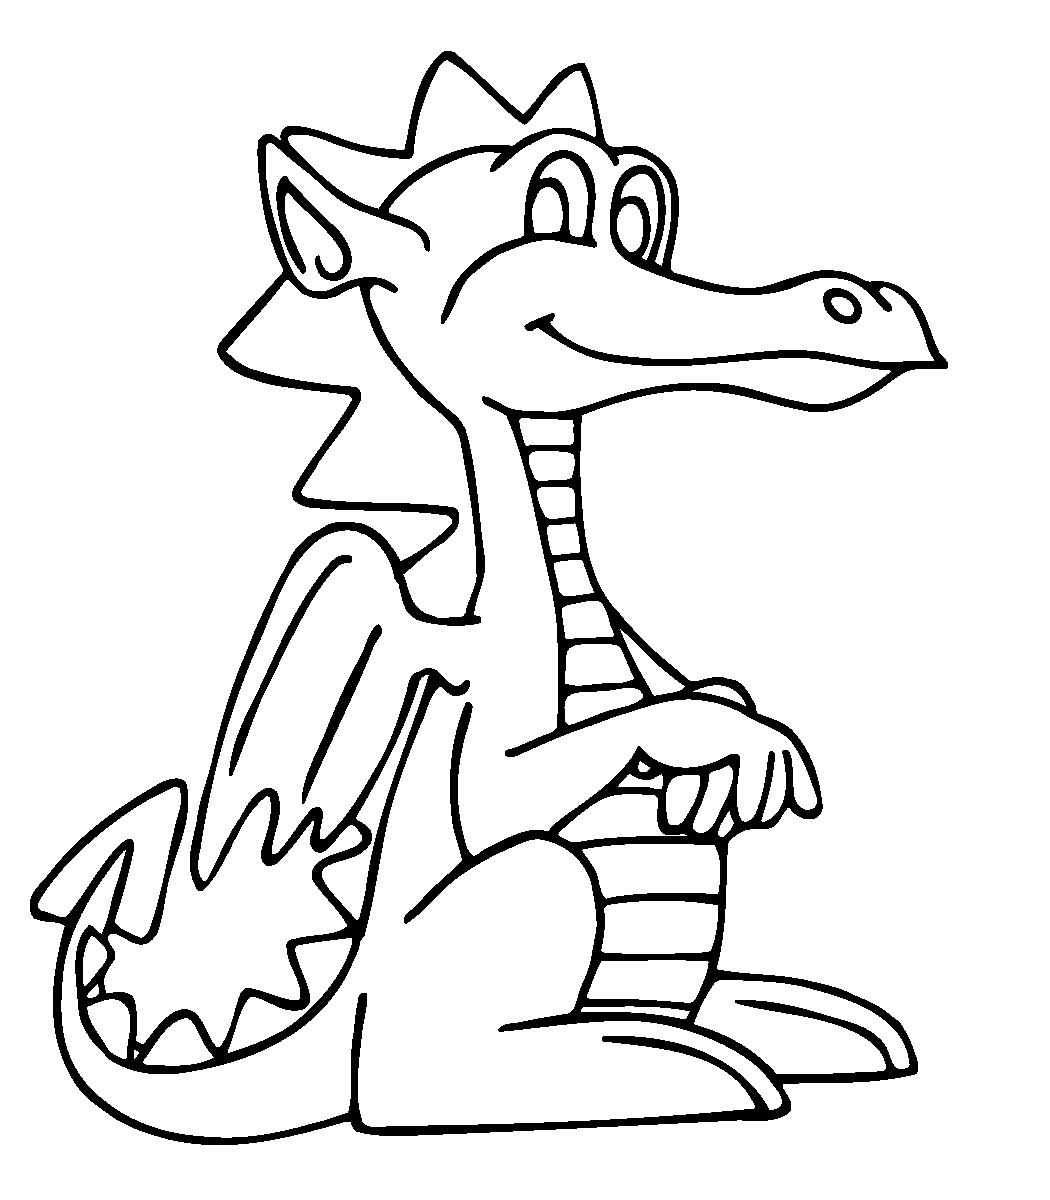 Images For > Baby Dragon Drawing For Kids